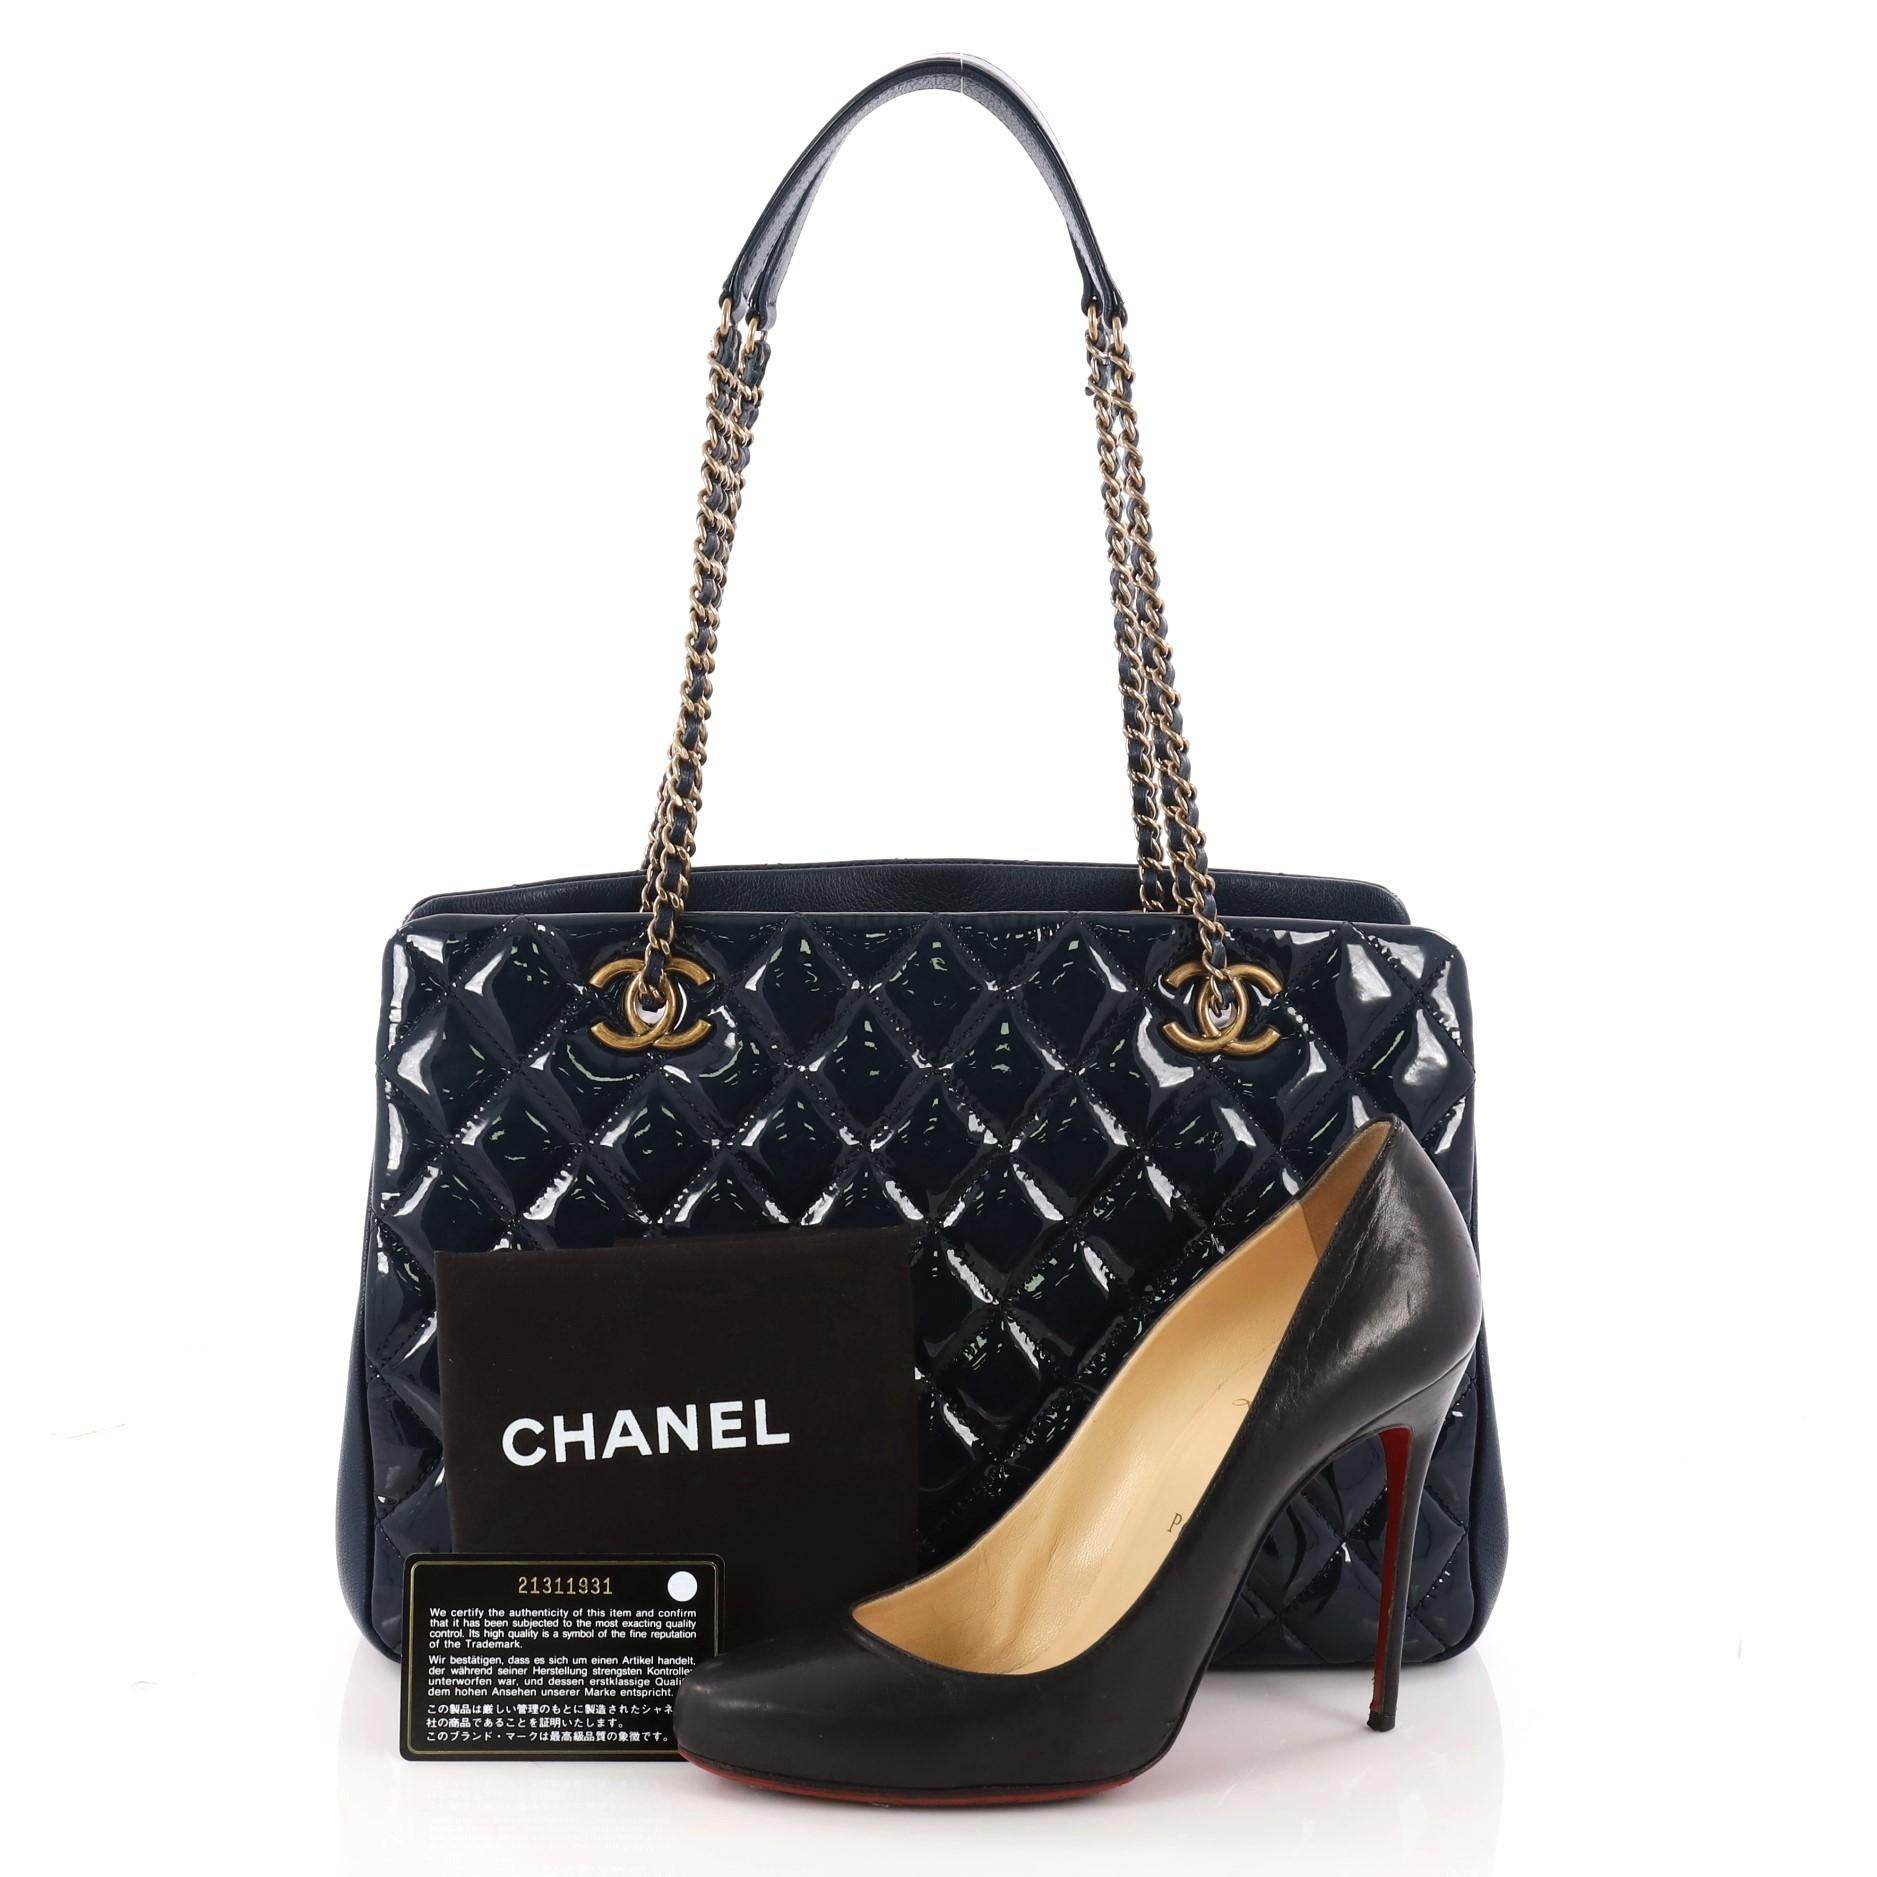 This authentic Chanel Eyelet Tote Quilted Patent Medium is an excellent bag for day or evening wear. Crafted in blue quilted patent leather, this bag features woven-in leather chain straps with leather pads, CC logo on eyelets, two exterior side